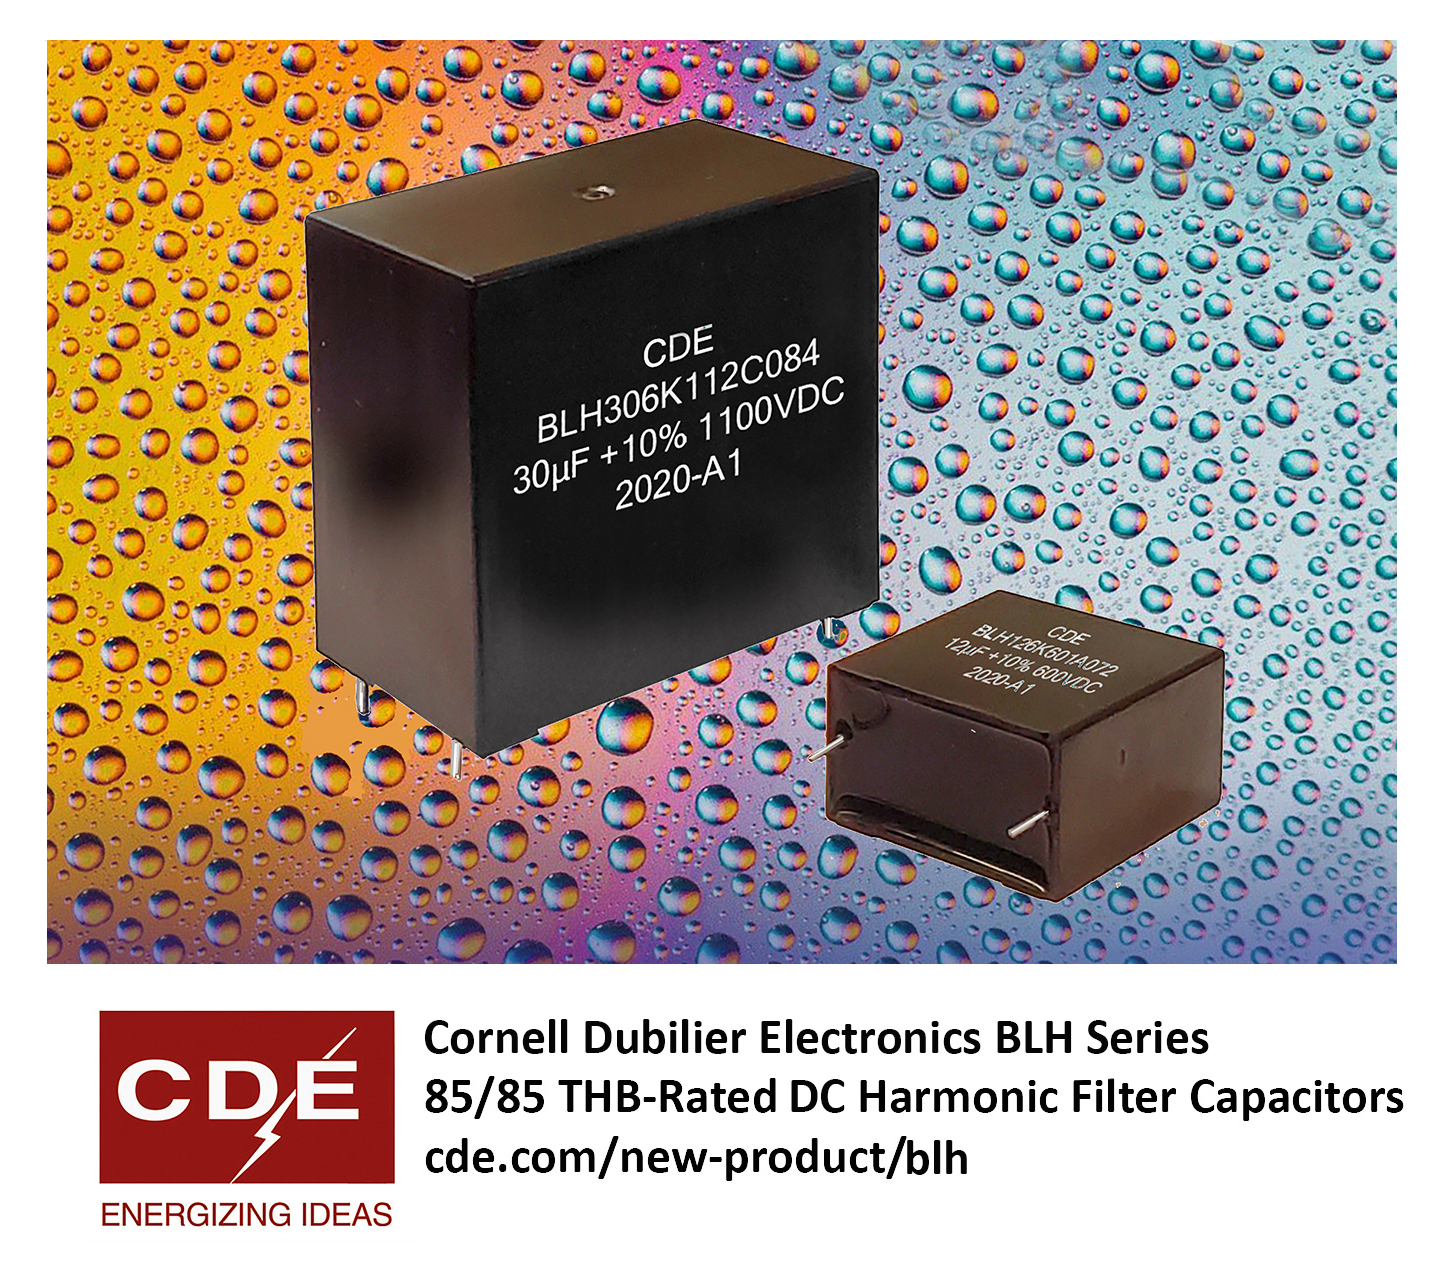 THB-Rated DC Link Capacitors Offer 50% Greater Life